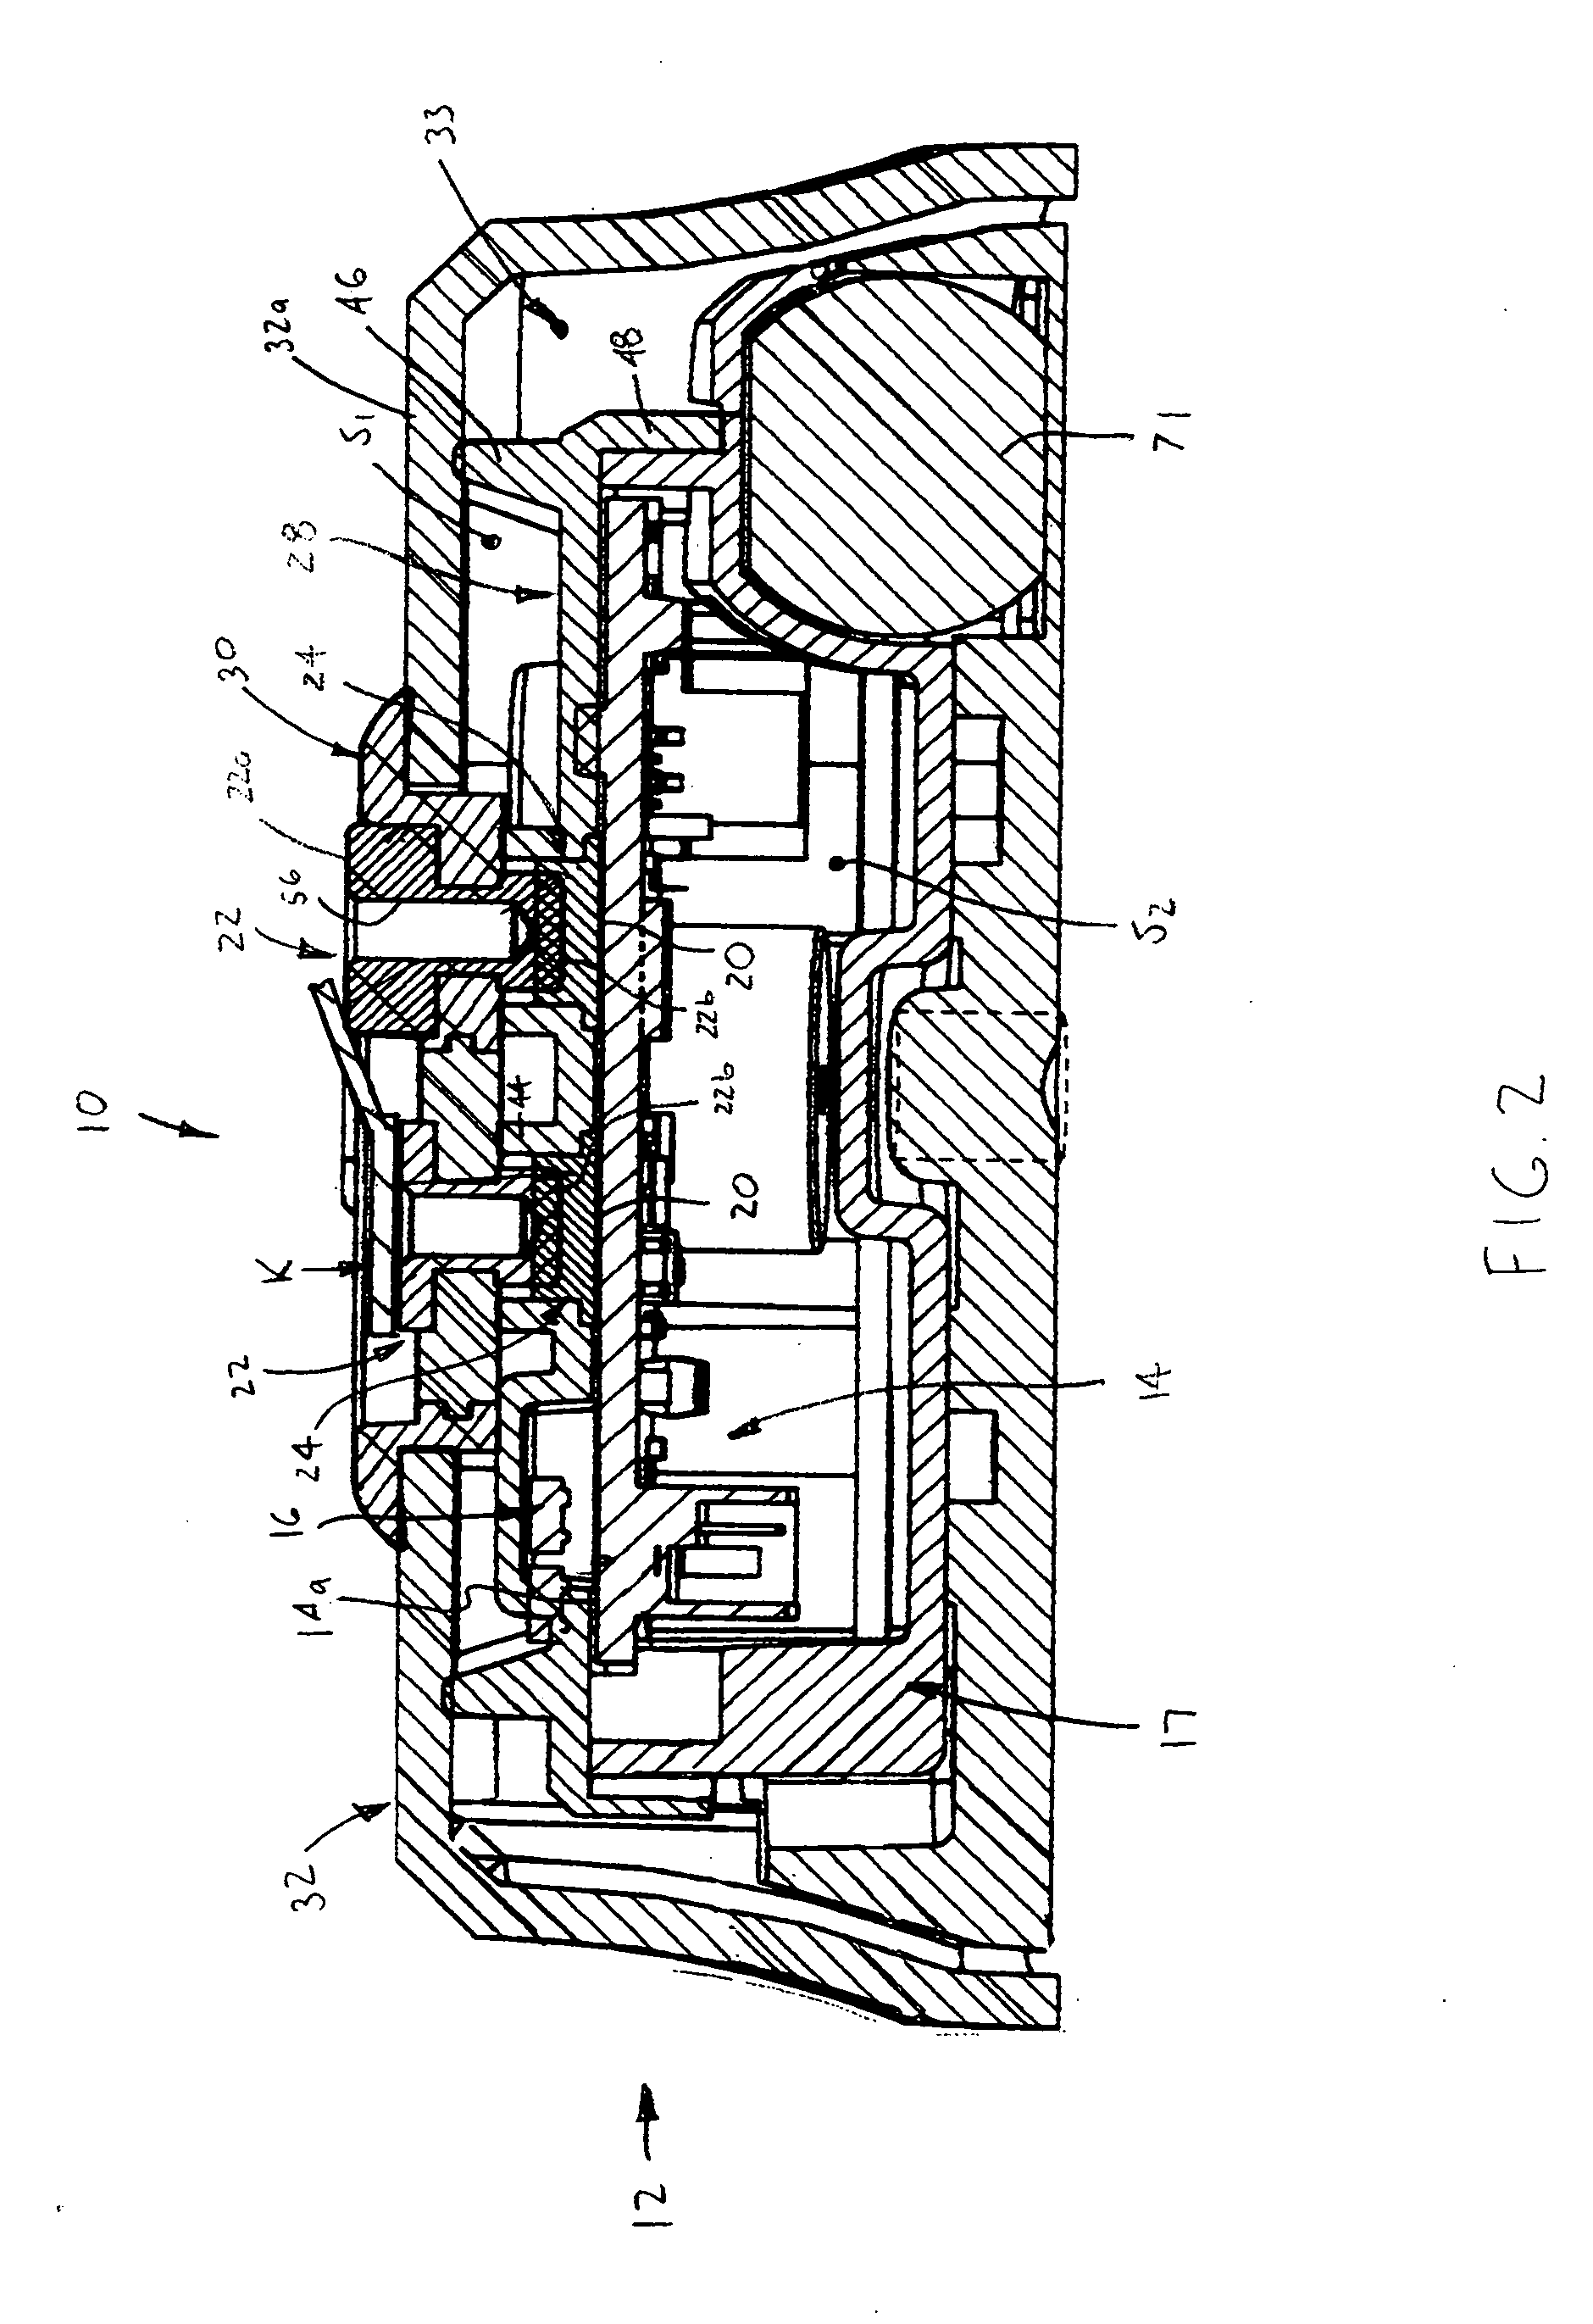 Data interface assembly for electronic locks and readers